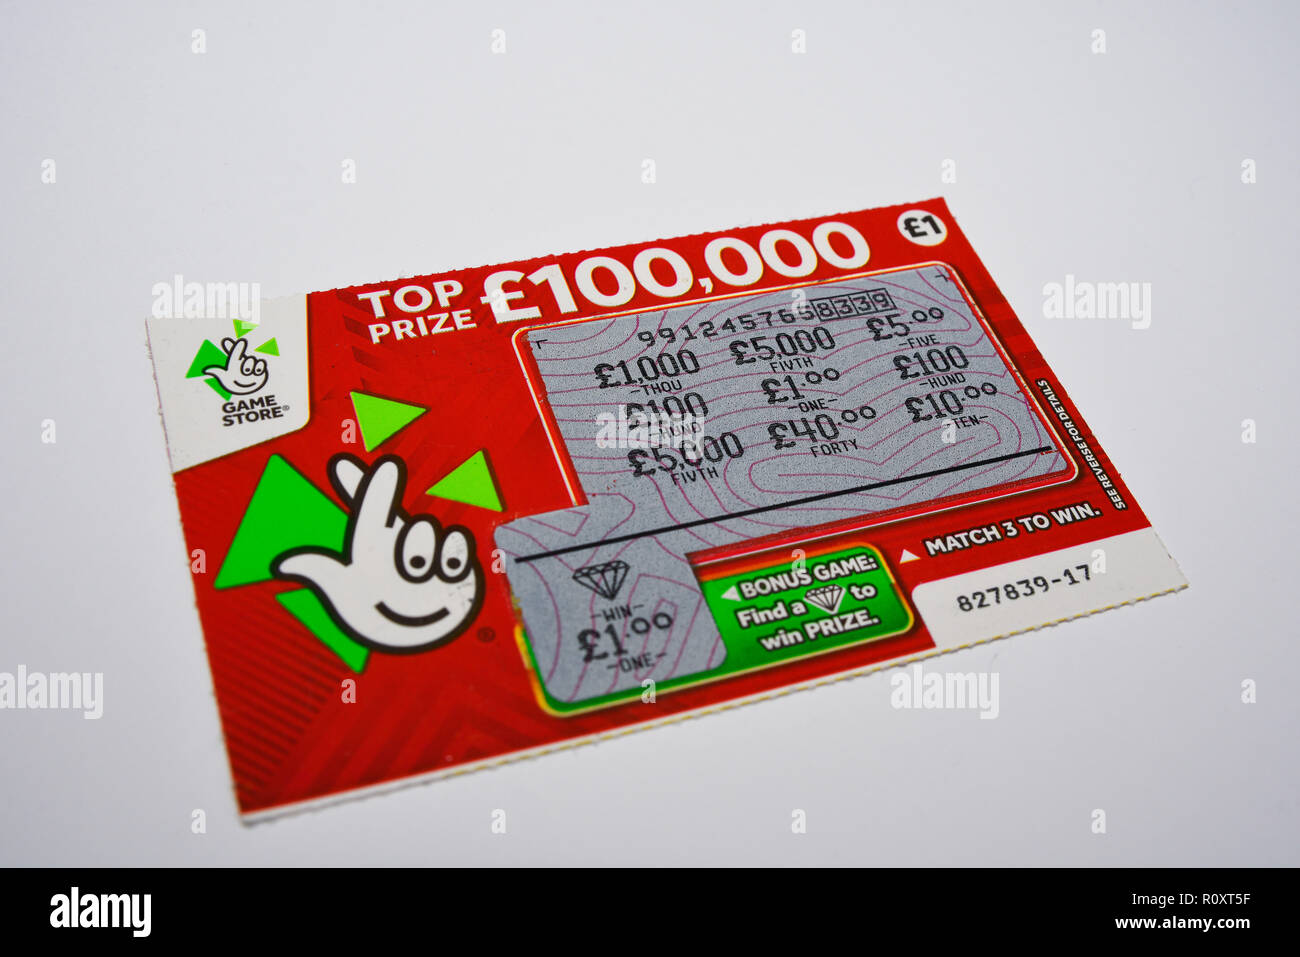 Winning scratchcard national lottery ticket. £1 win. Winning scratch card. Bonus game win. Game store. £1 play. Isolated on a white background Stock Photo